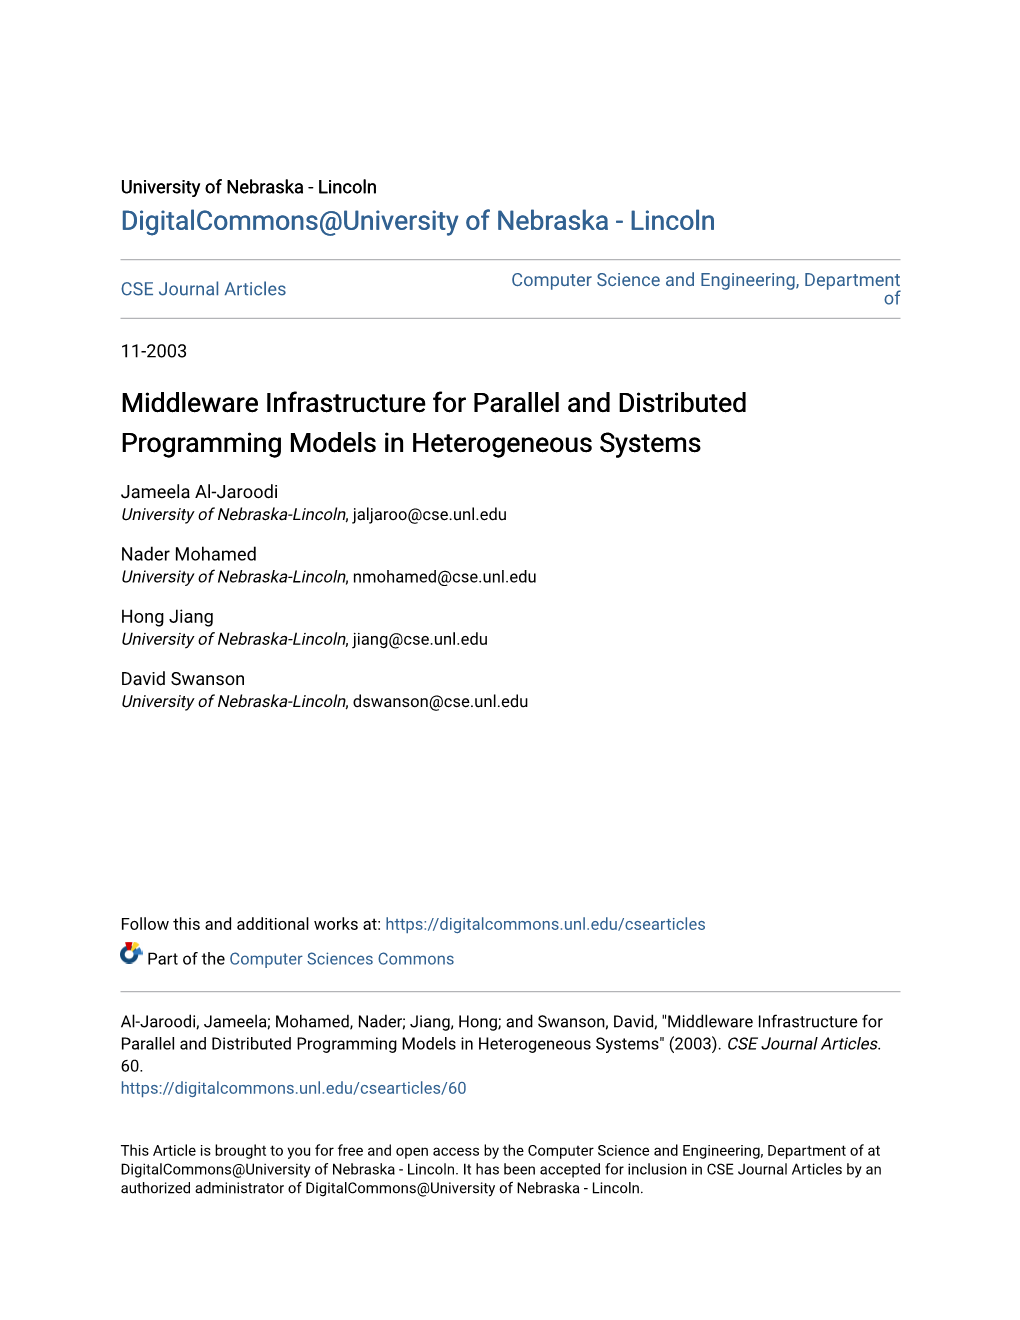 Middleware Infrastructure for Parallel and Distributed Programming Models in Heterogeneous Systems